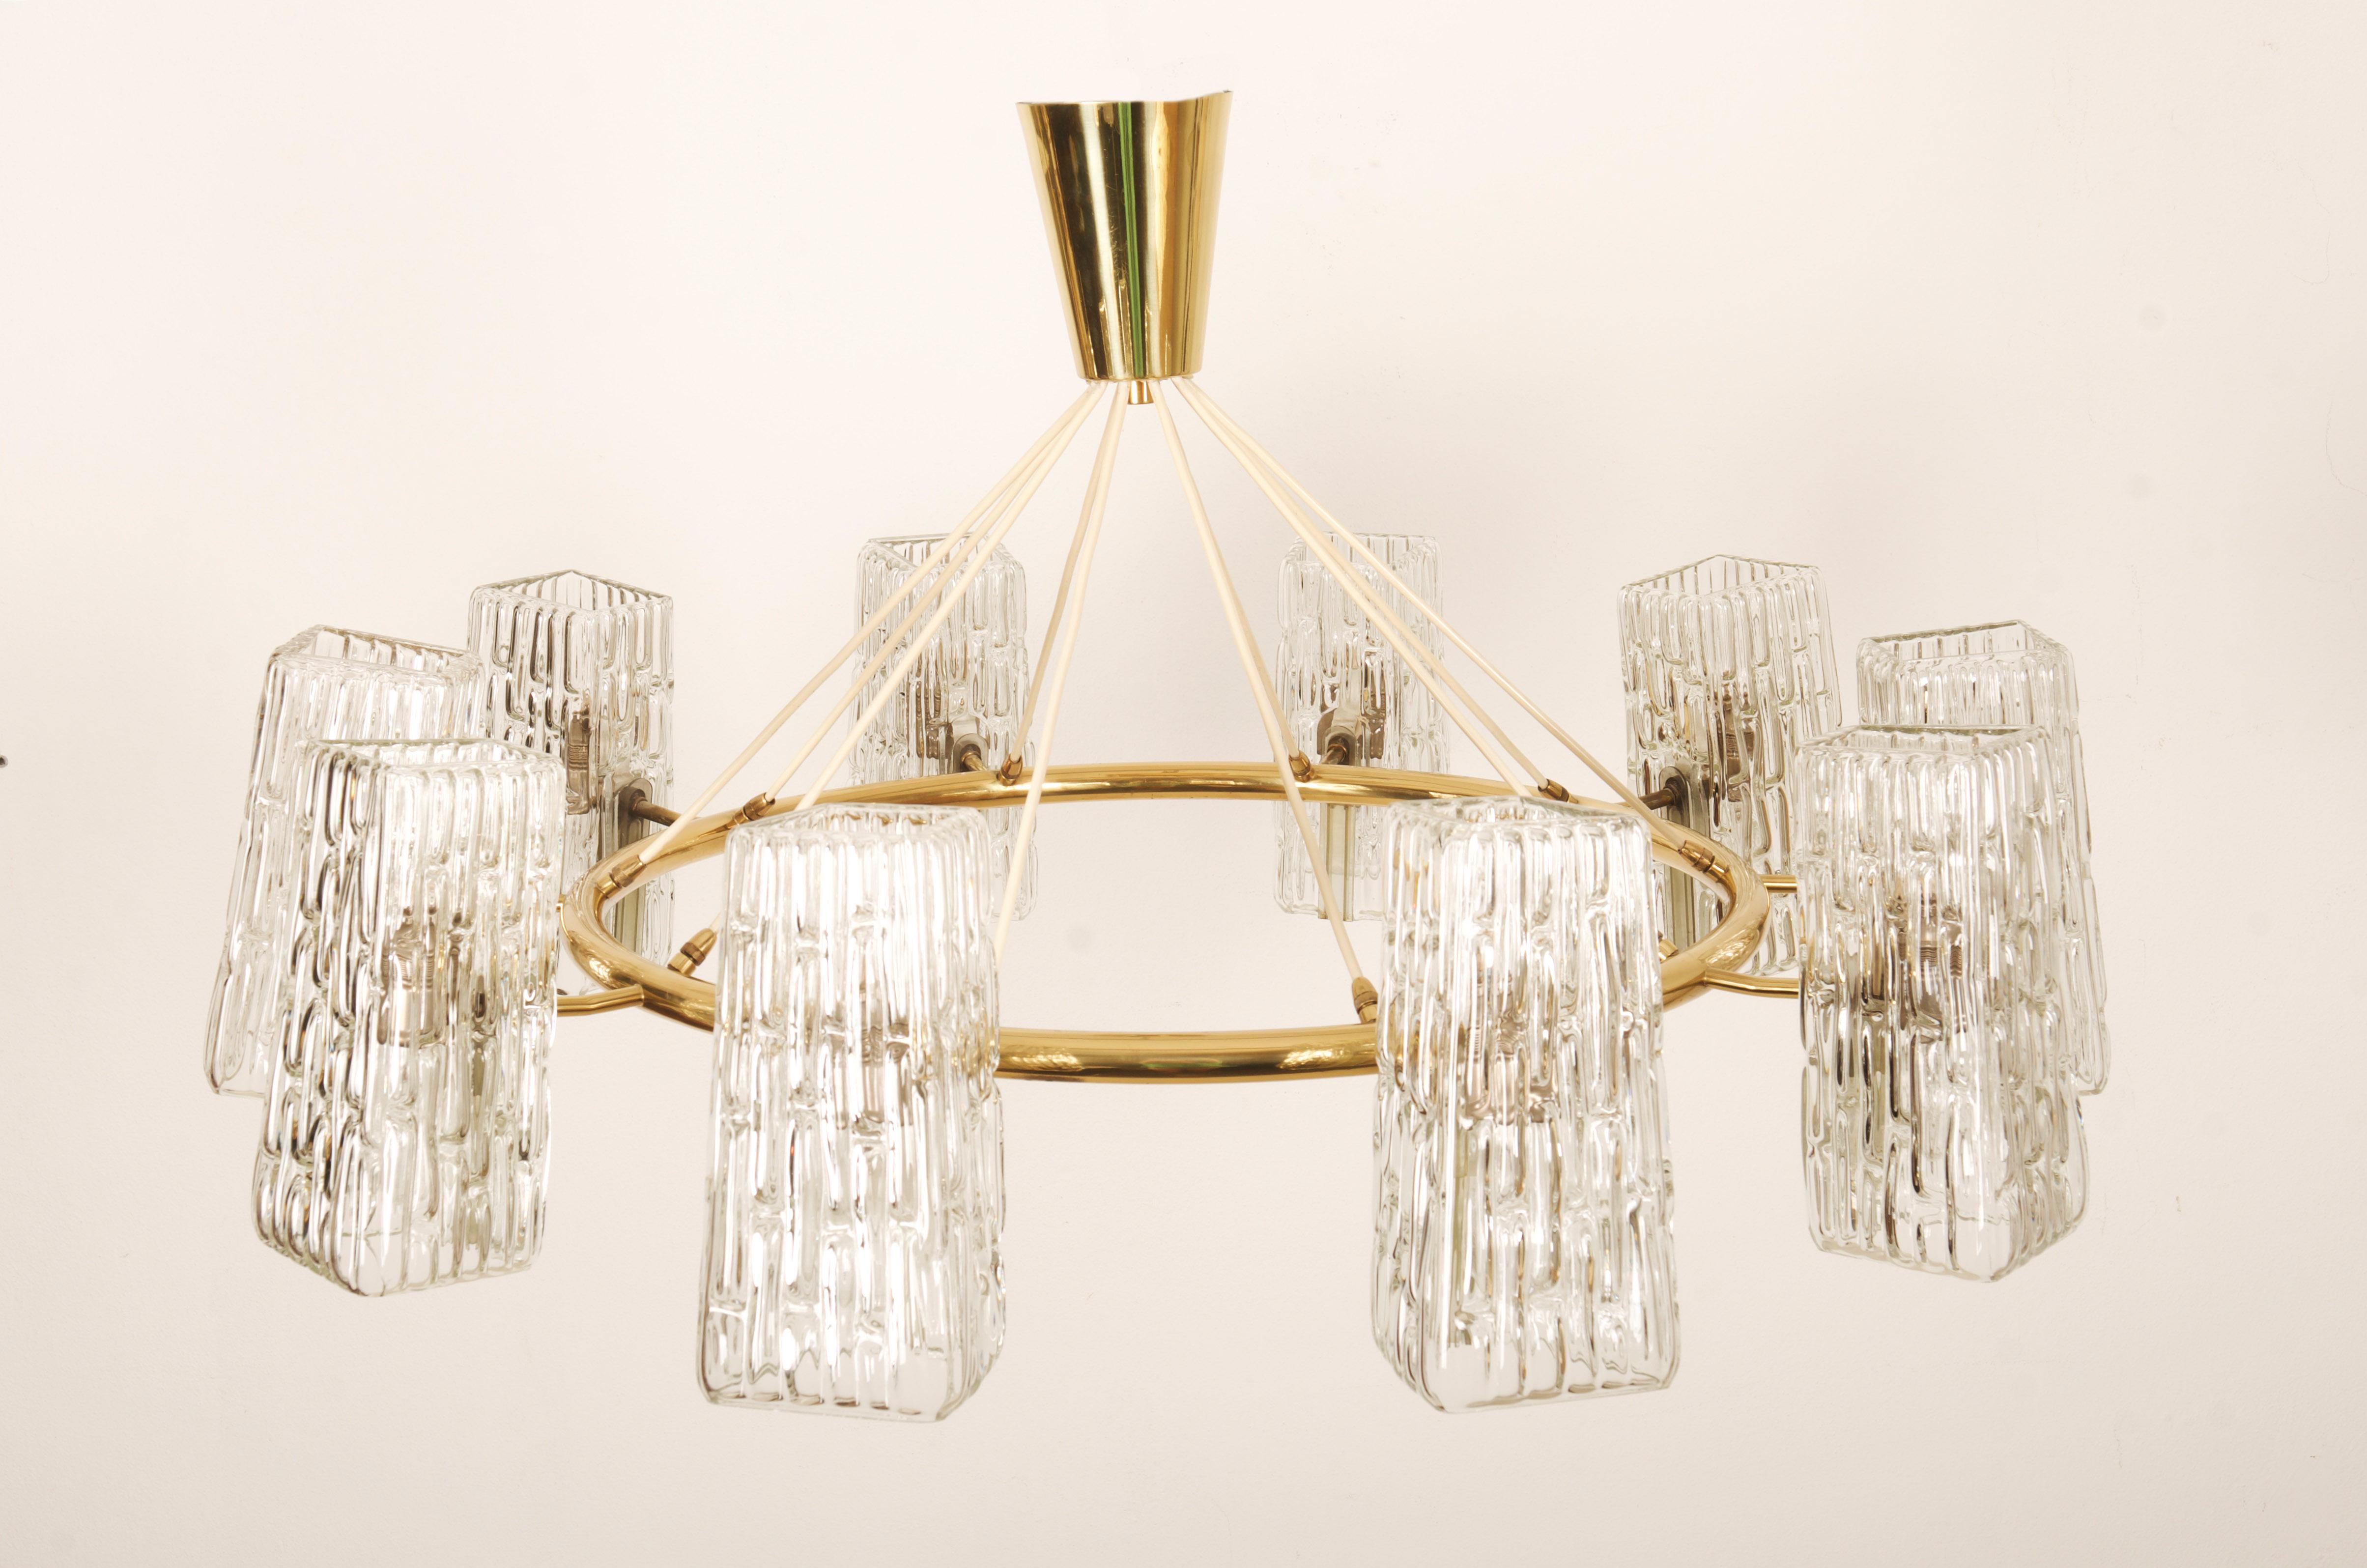 Huge Midcentury Brass Chandelier With Pressed Glass Shades By Rupert Nikoll For Sale 9